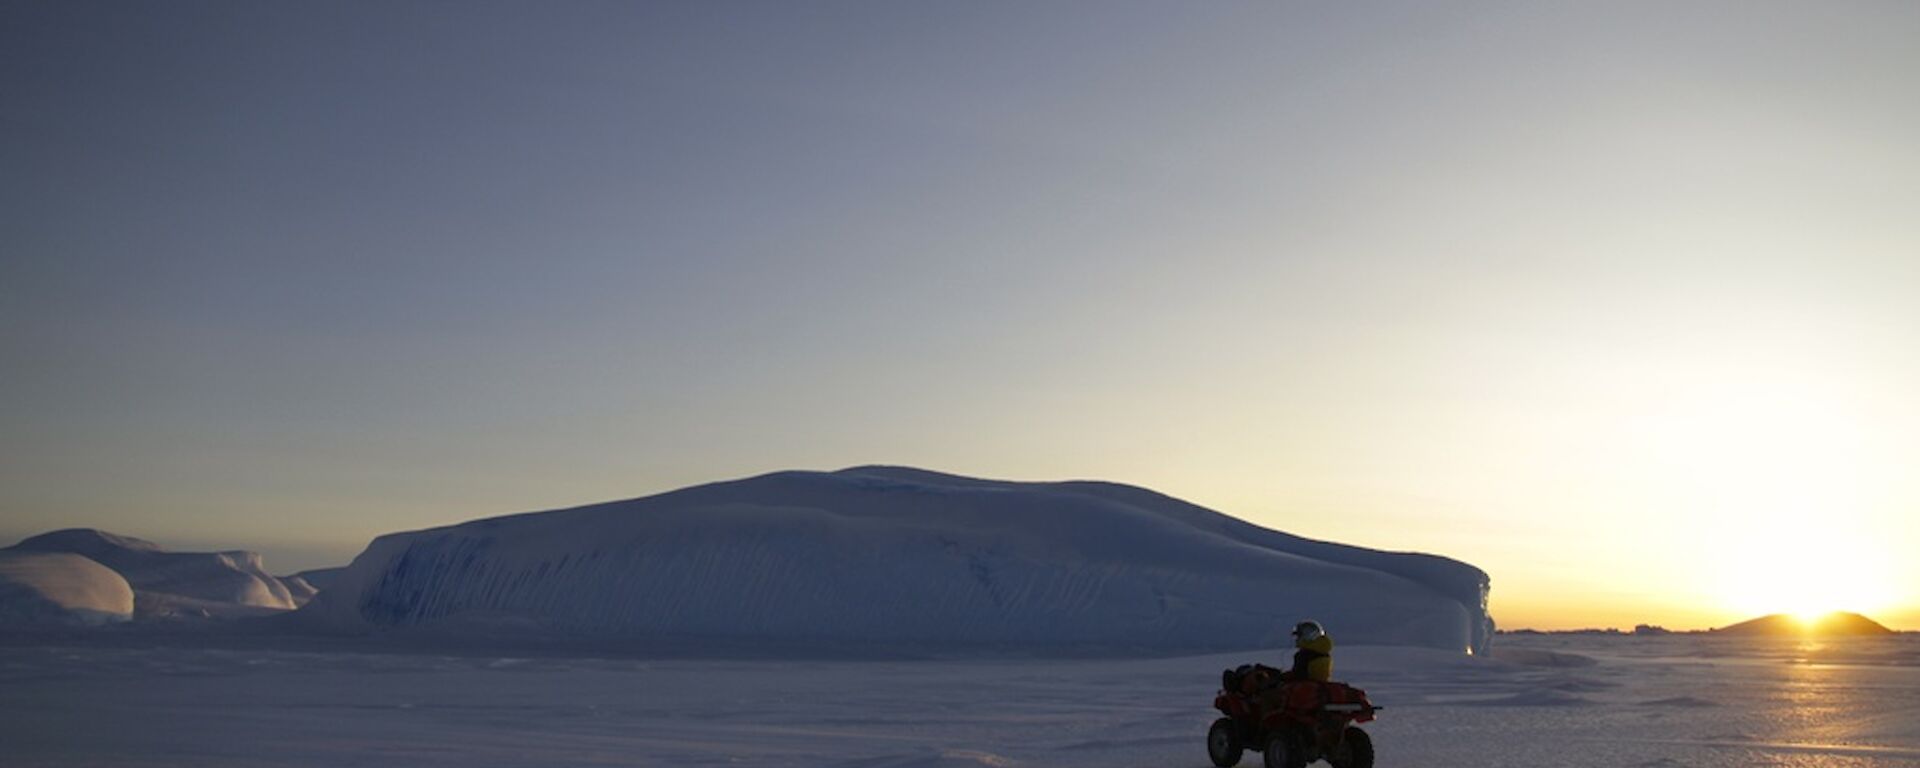 A large ice berg stuck in the fast ice in the distance with a quad bike and rider in the foreground